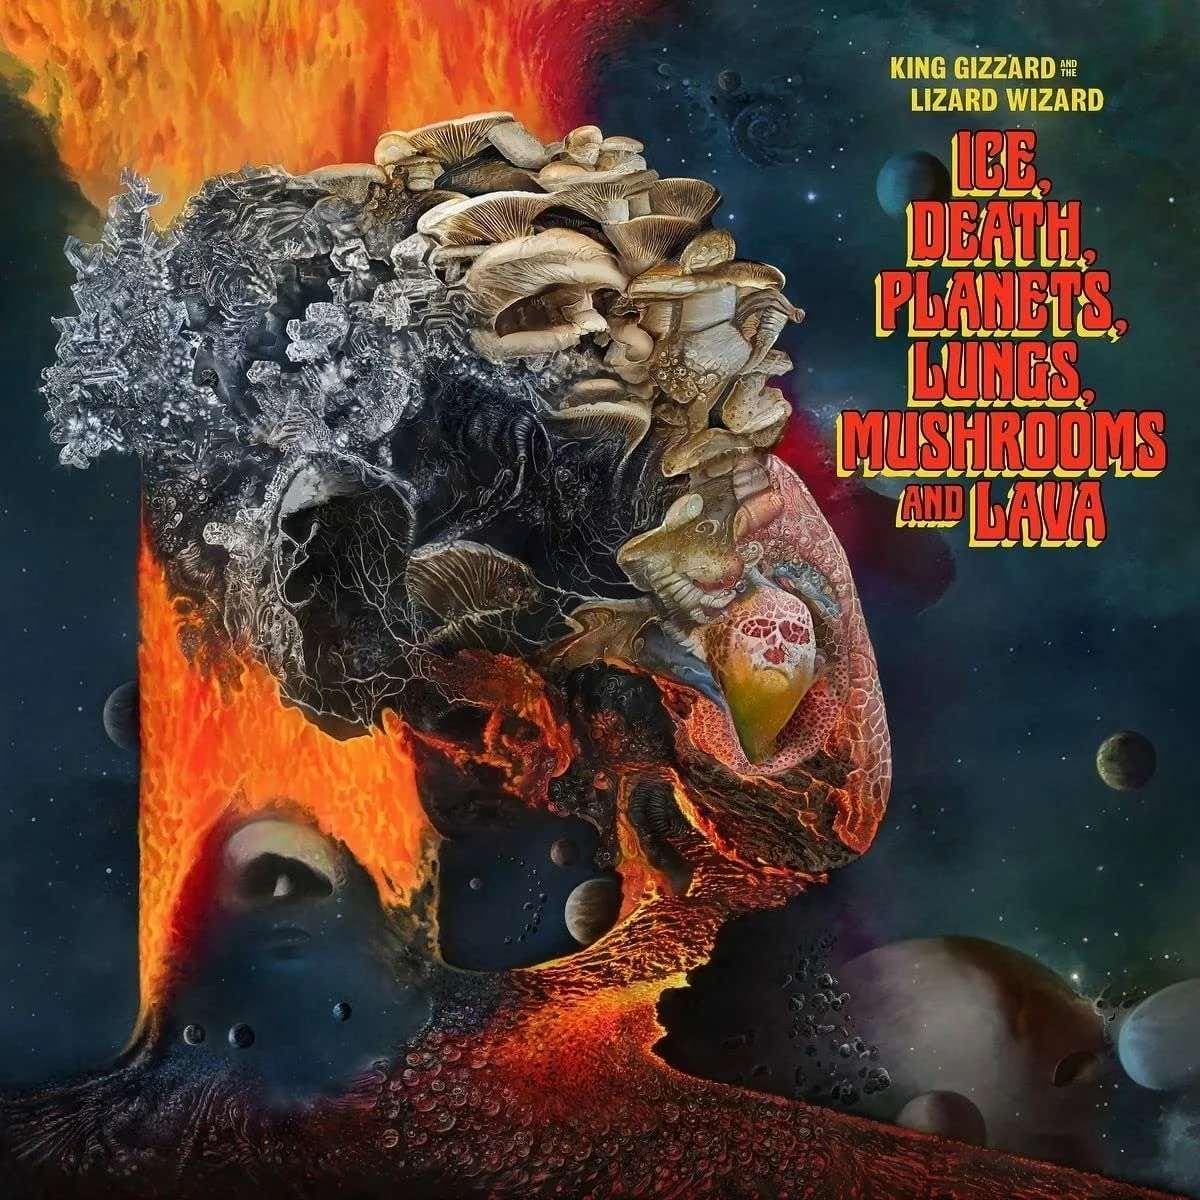 KING GIZZARD & THE LIZARD WIZARD - Ice, Death, Planets, Lungs, Mushrooms and Lava Vinyl - JWrayRecords